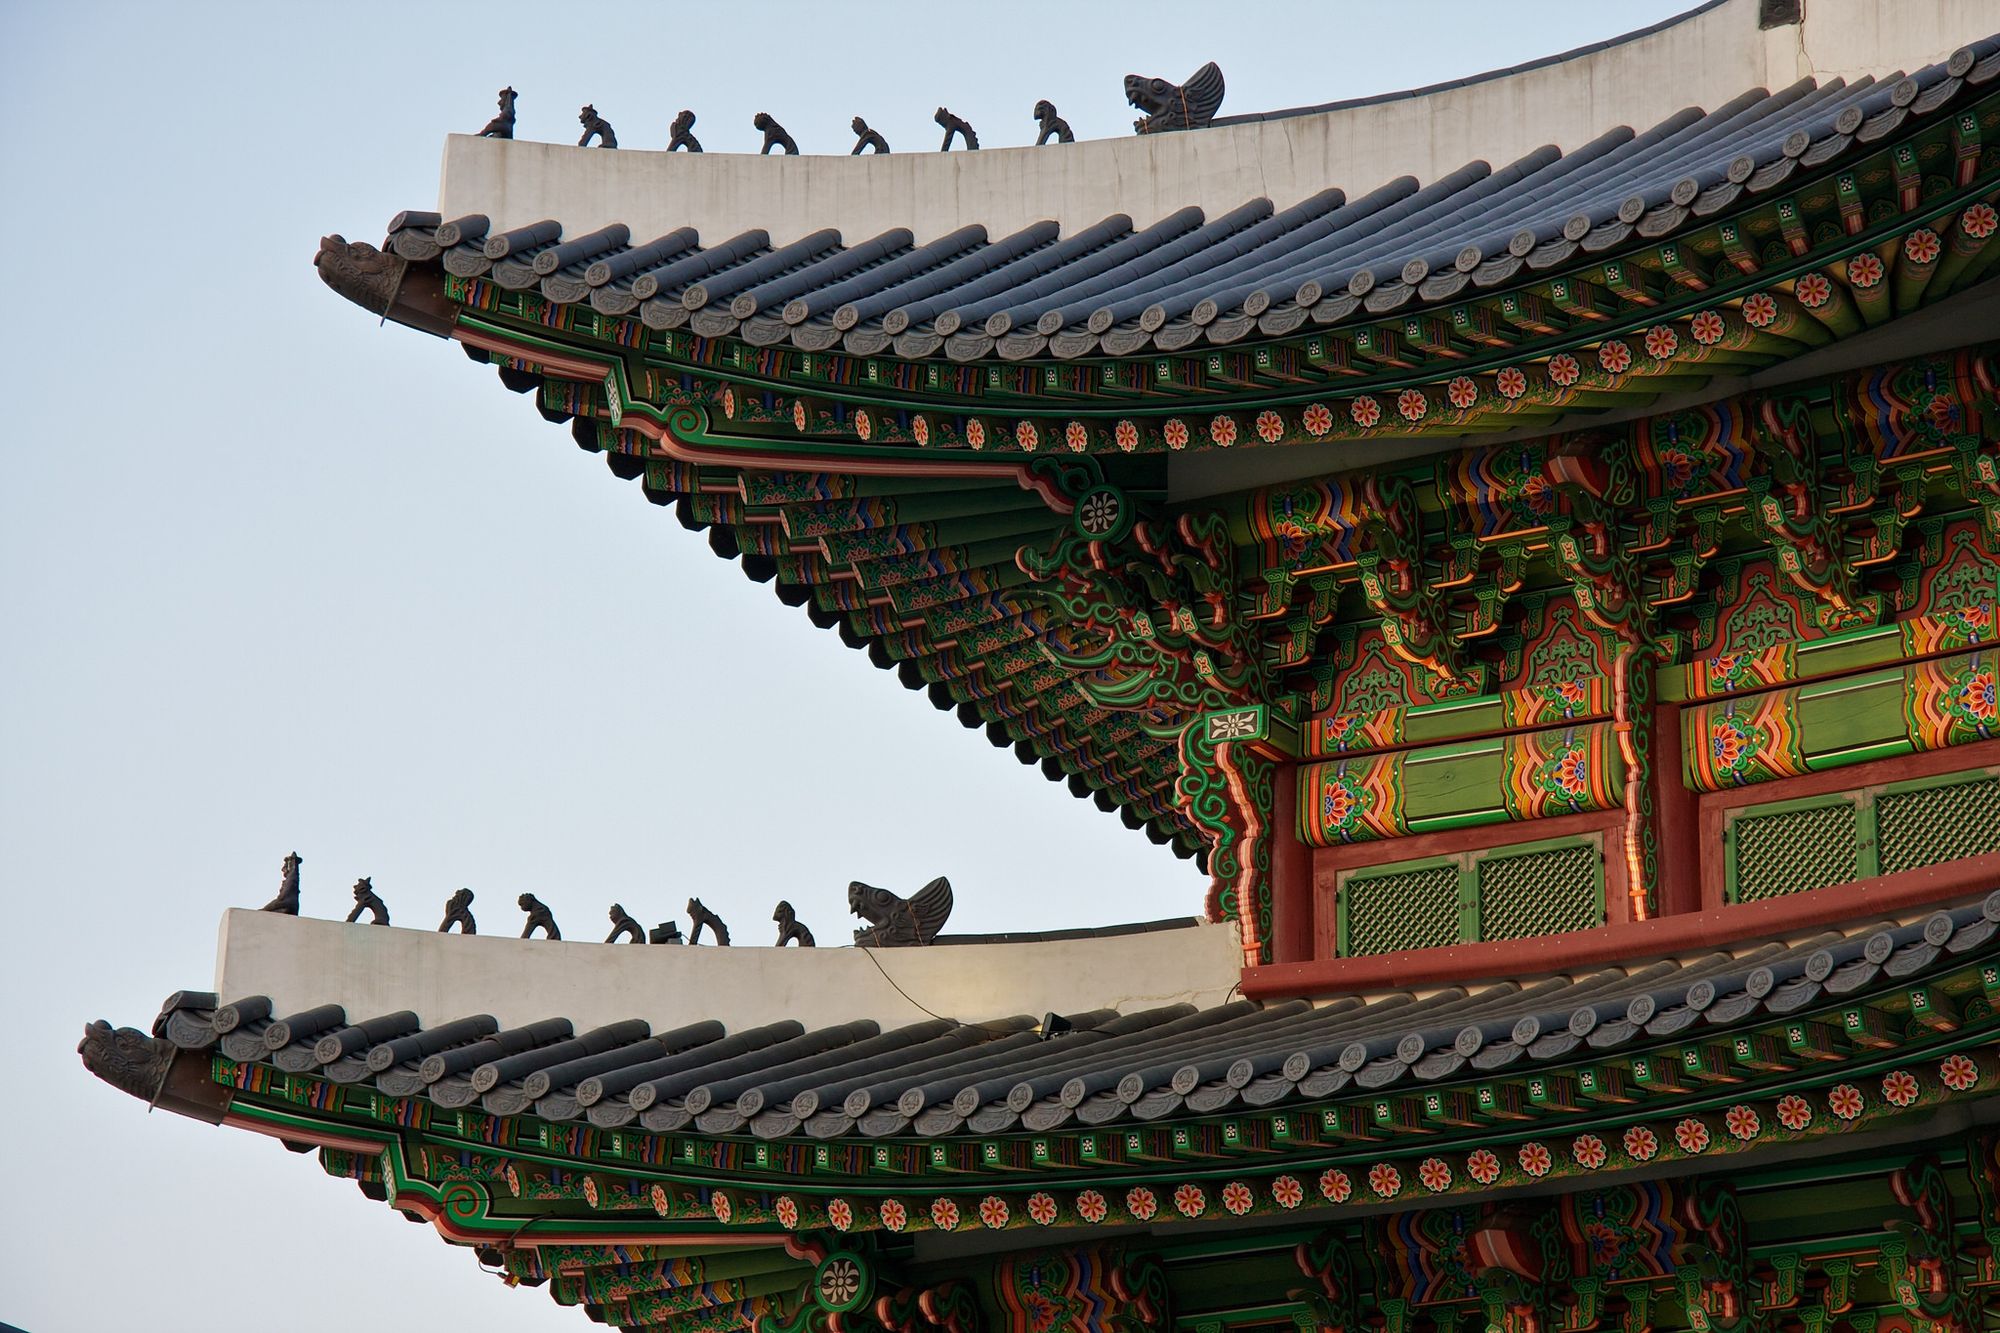 Gyeongbokgung palace map and detailed guide to visit the largest palace in Korea